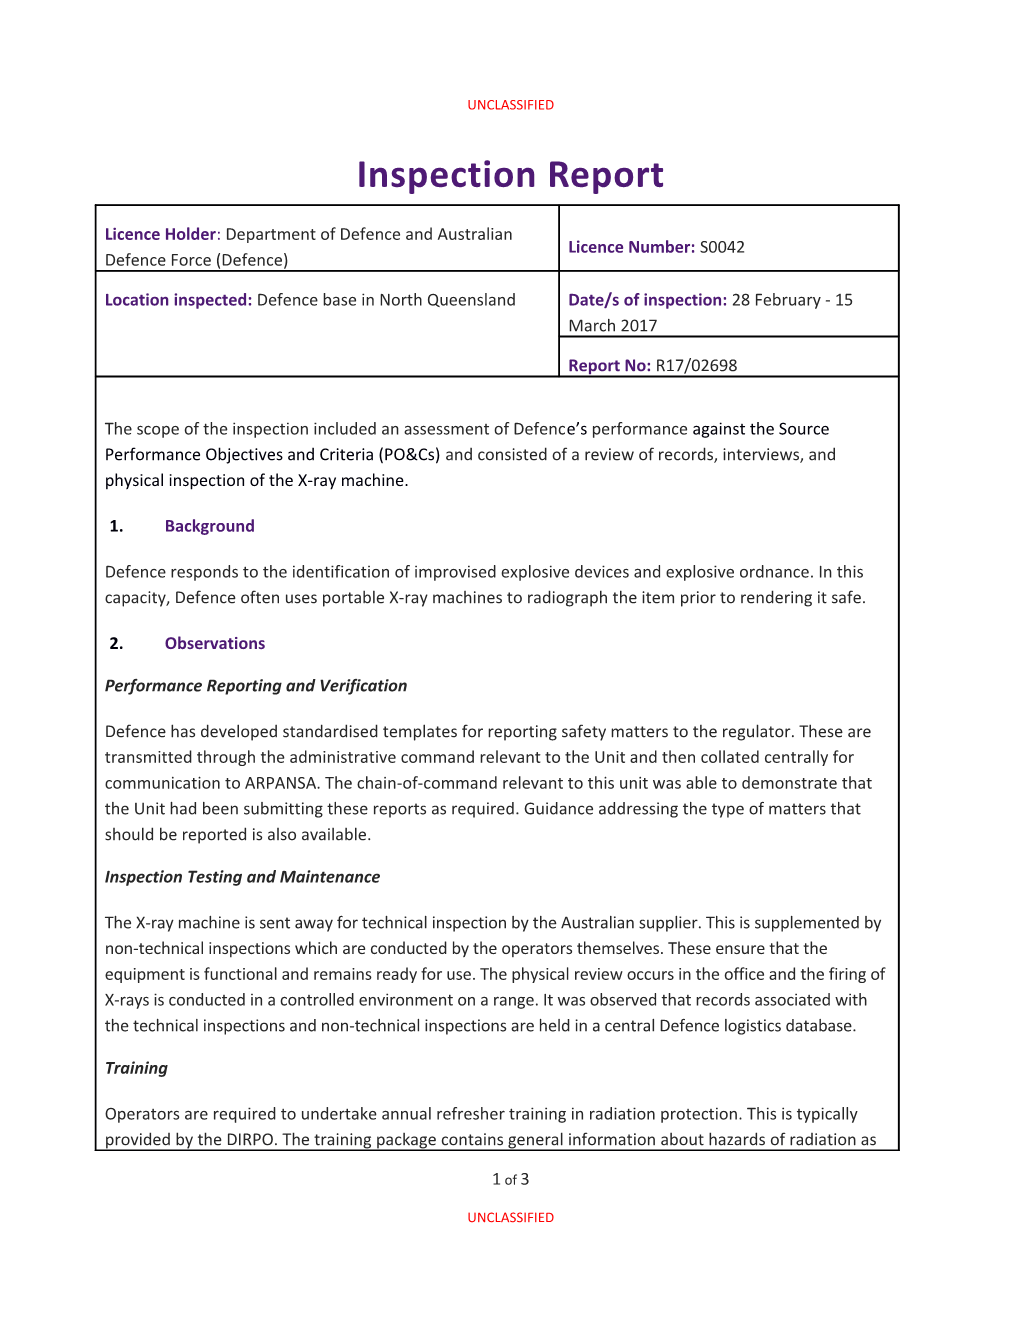 Inspection Report: Department of Defence and Australian Defence Force - Defence Base In